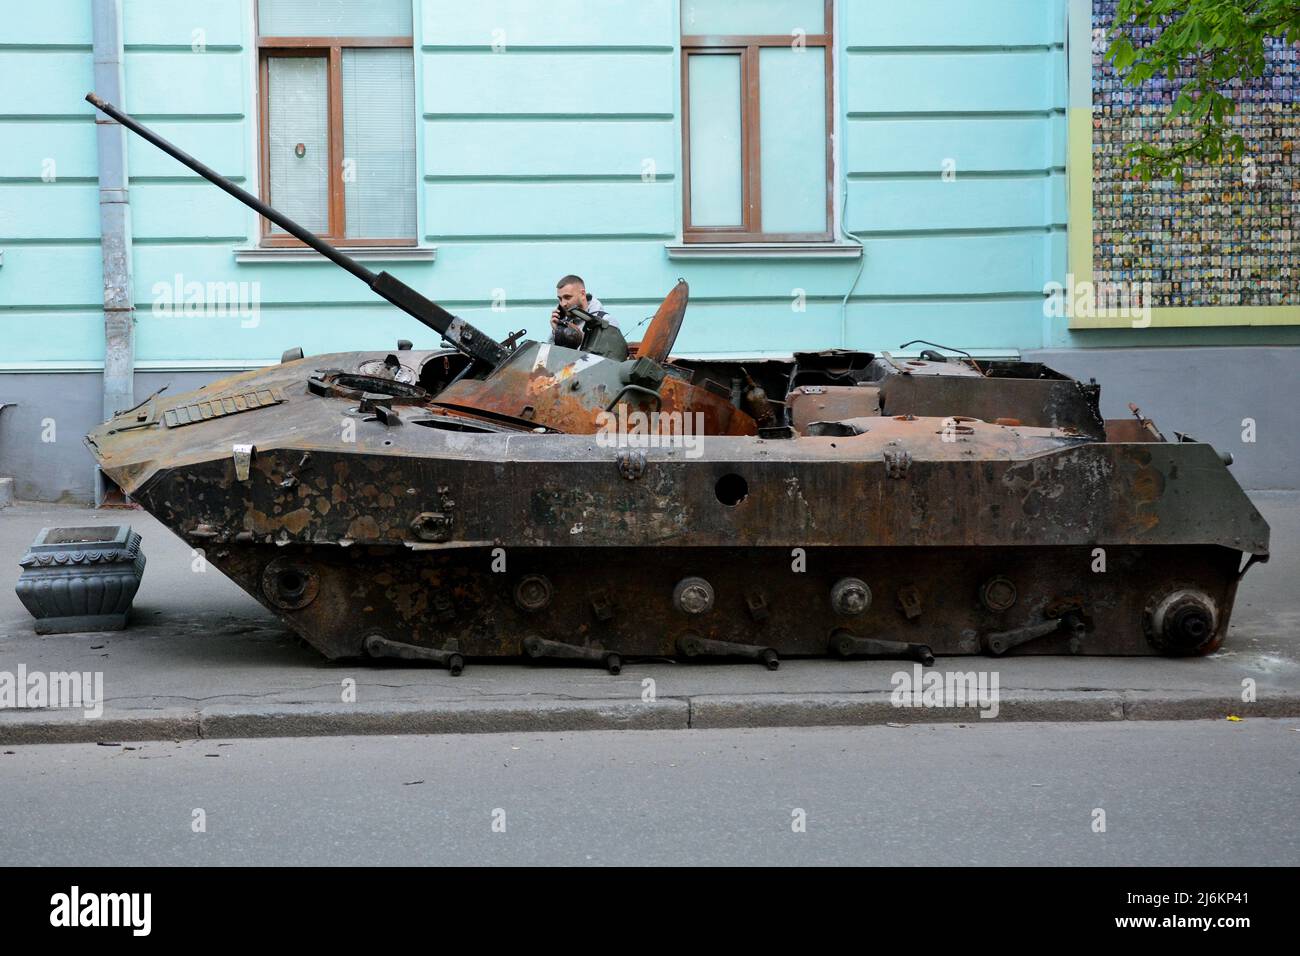 Kyiv region, Ukraine - 02 May 2022, A man examines a destroyed Russian tank parked on the roadside, it was destroyed by the Ukrainian military in the Kiev region. Russia invaded Ukraine on 24 February 2022, triggering the largest military attack in Europe since World War II. Stock Photo